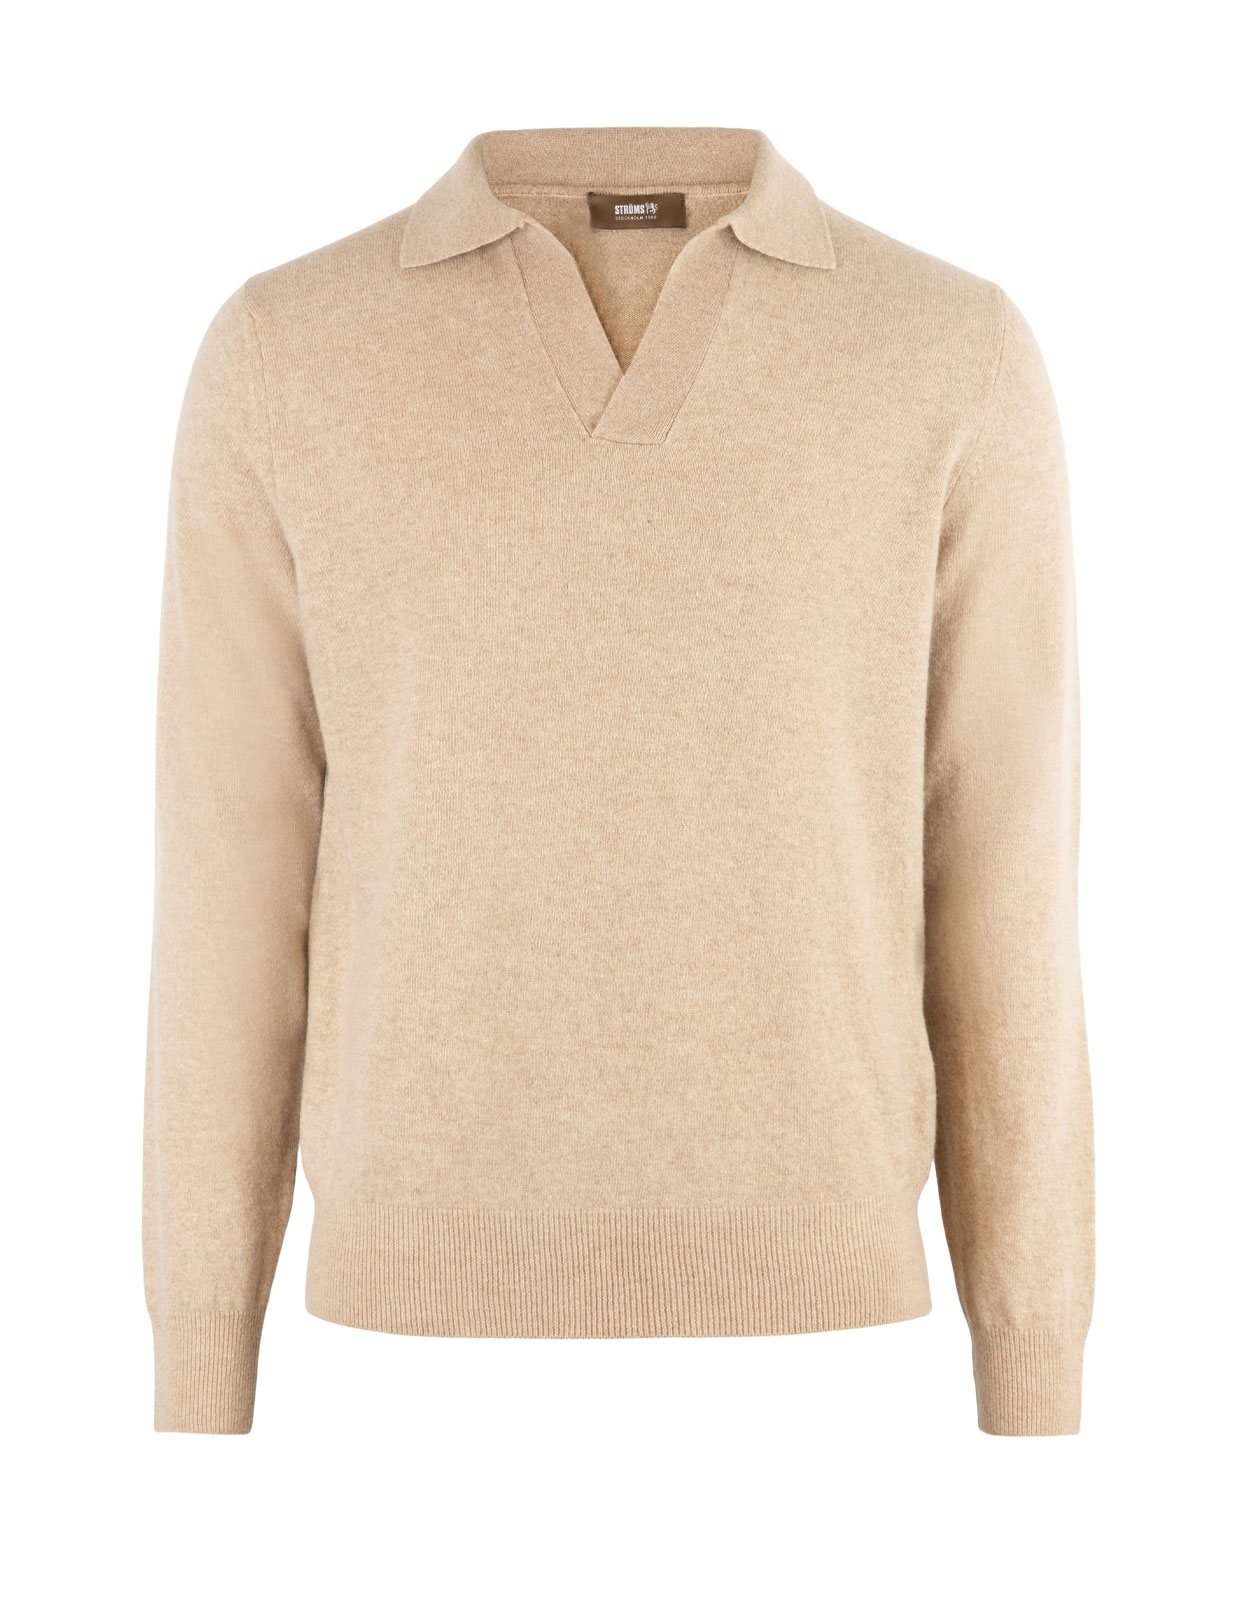 Open Polo Tröja Ull/Cashmere Beige Stl S